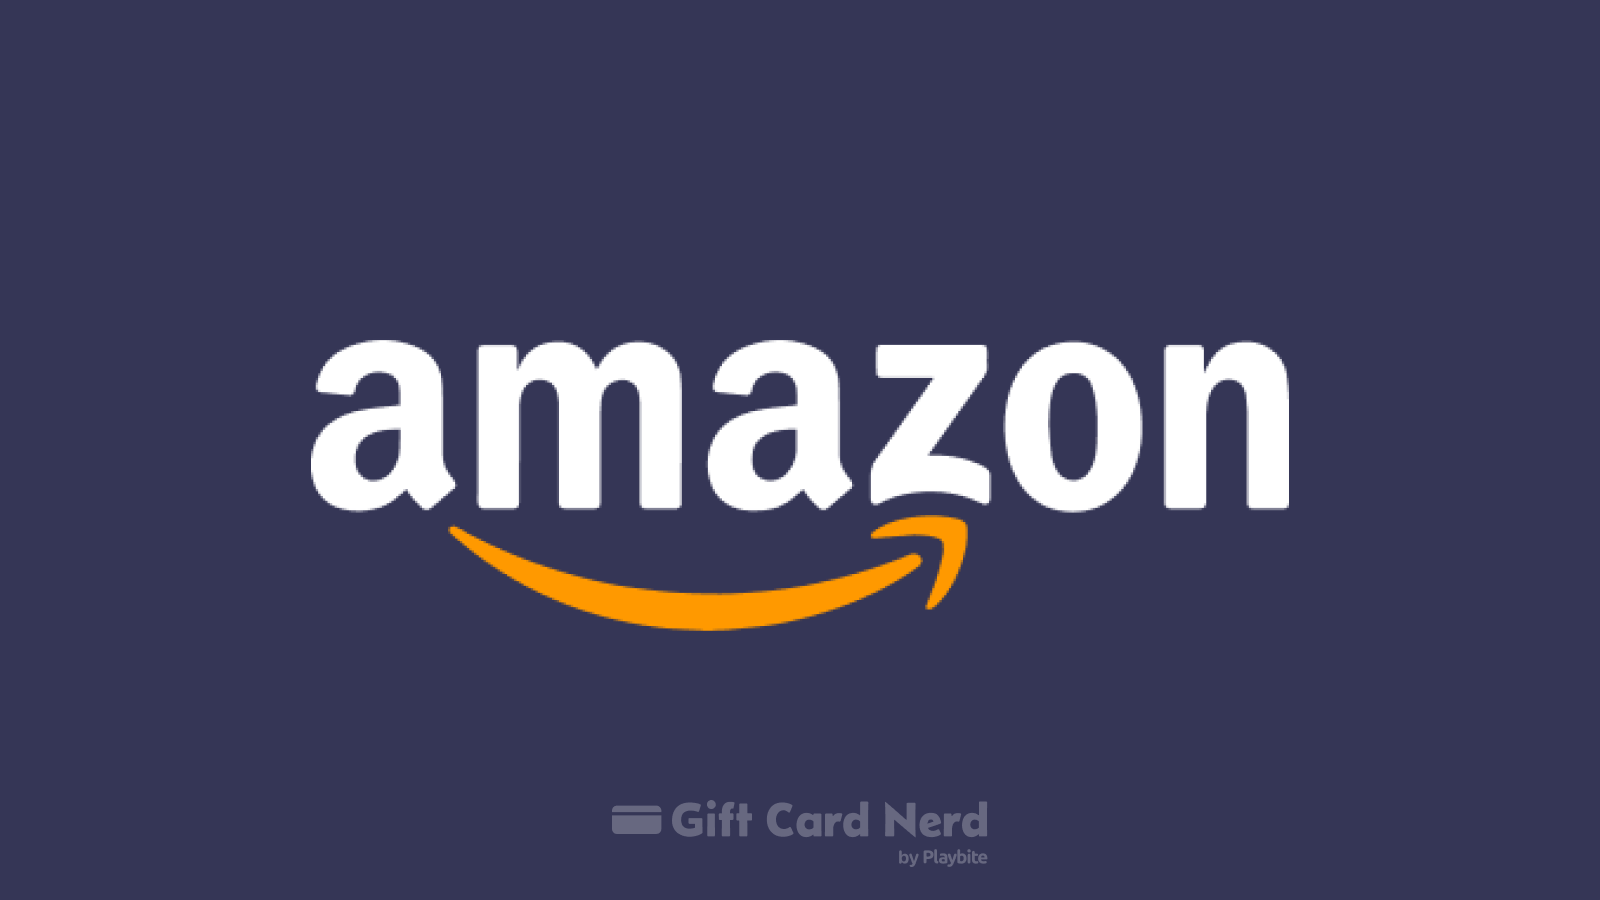 Can I use an Amazon gift card on Amazon?